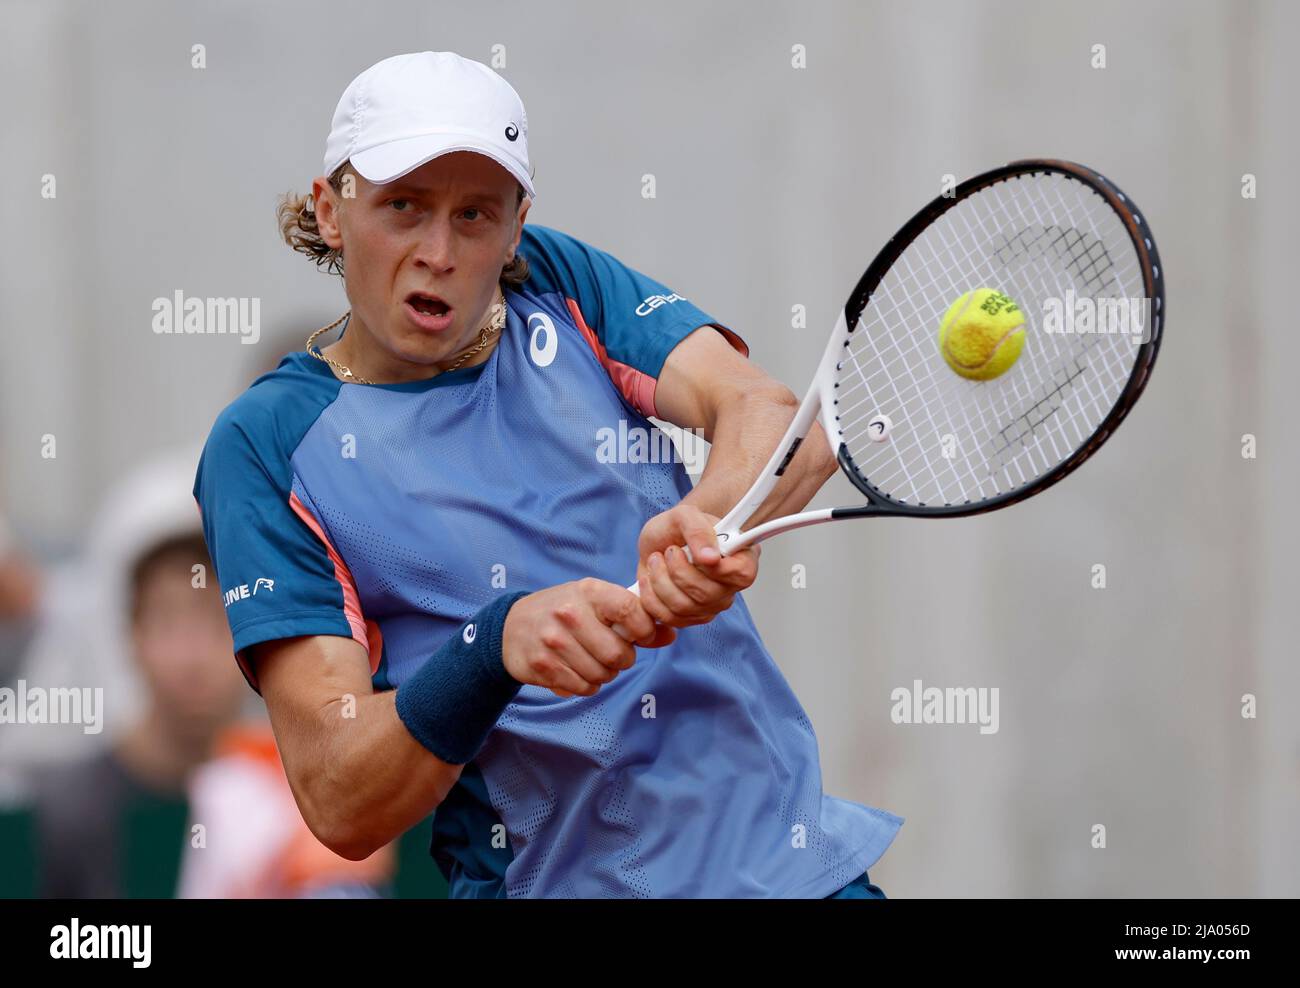 Tennis - French Open - Roland Garros, Paris, France - May 26, 2022  Finland's Emil Ruusuvuori in action during his second round match against  Norway's Casper Ruud REUTERS/Gonzalo Fuentes Stock Photo - Alamy